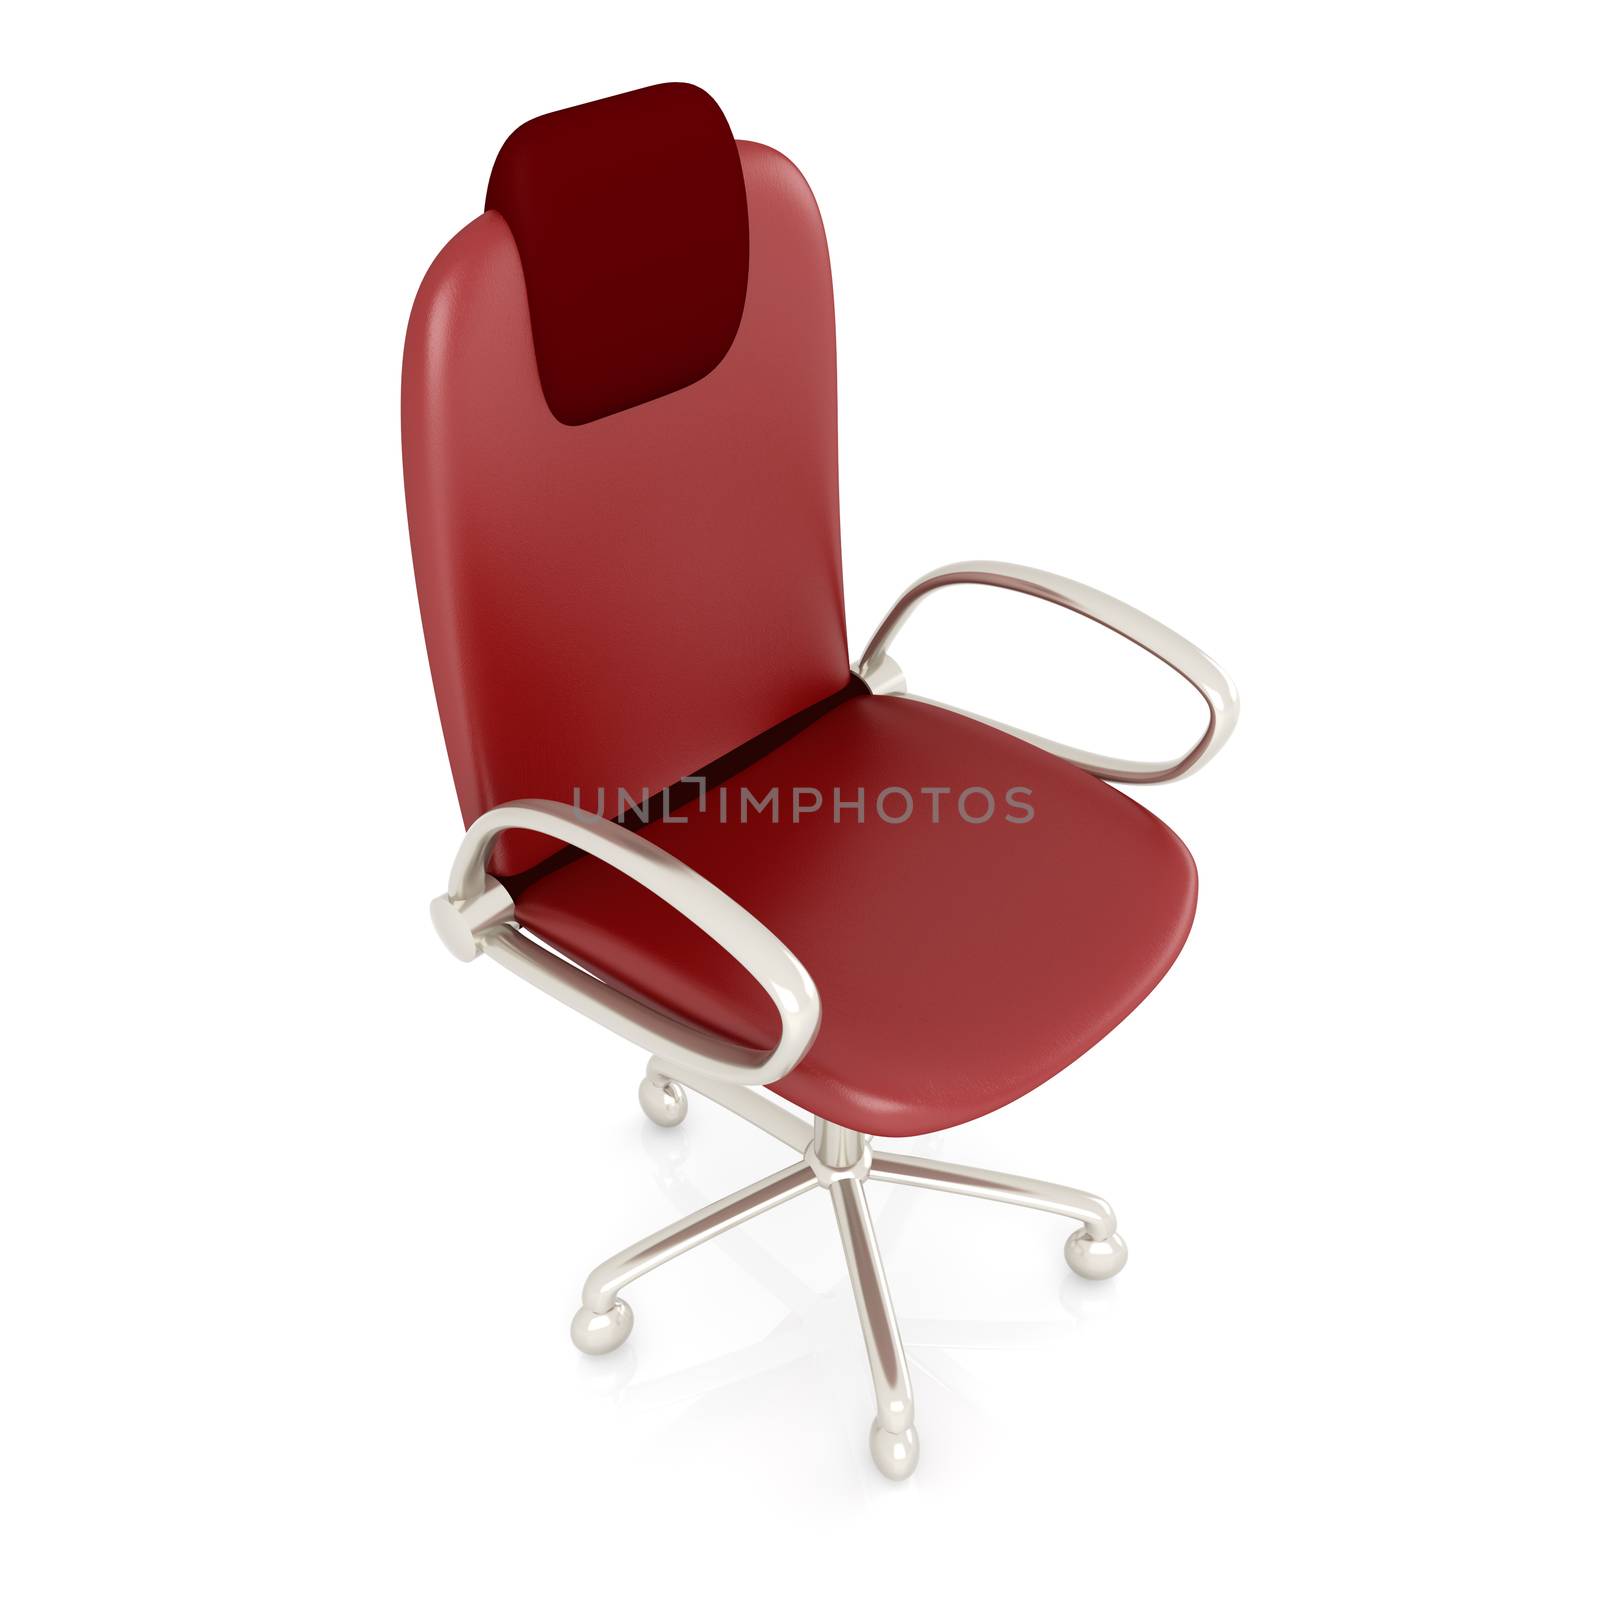 3D rendered office chair. Isolated on white.